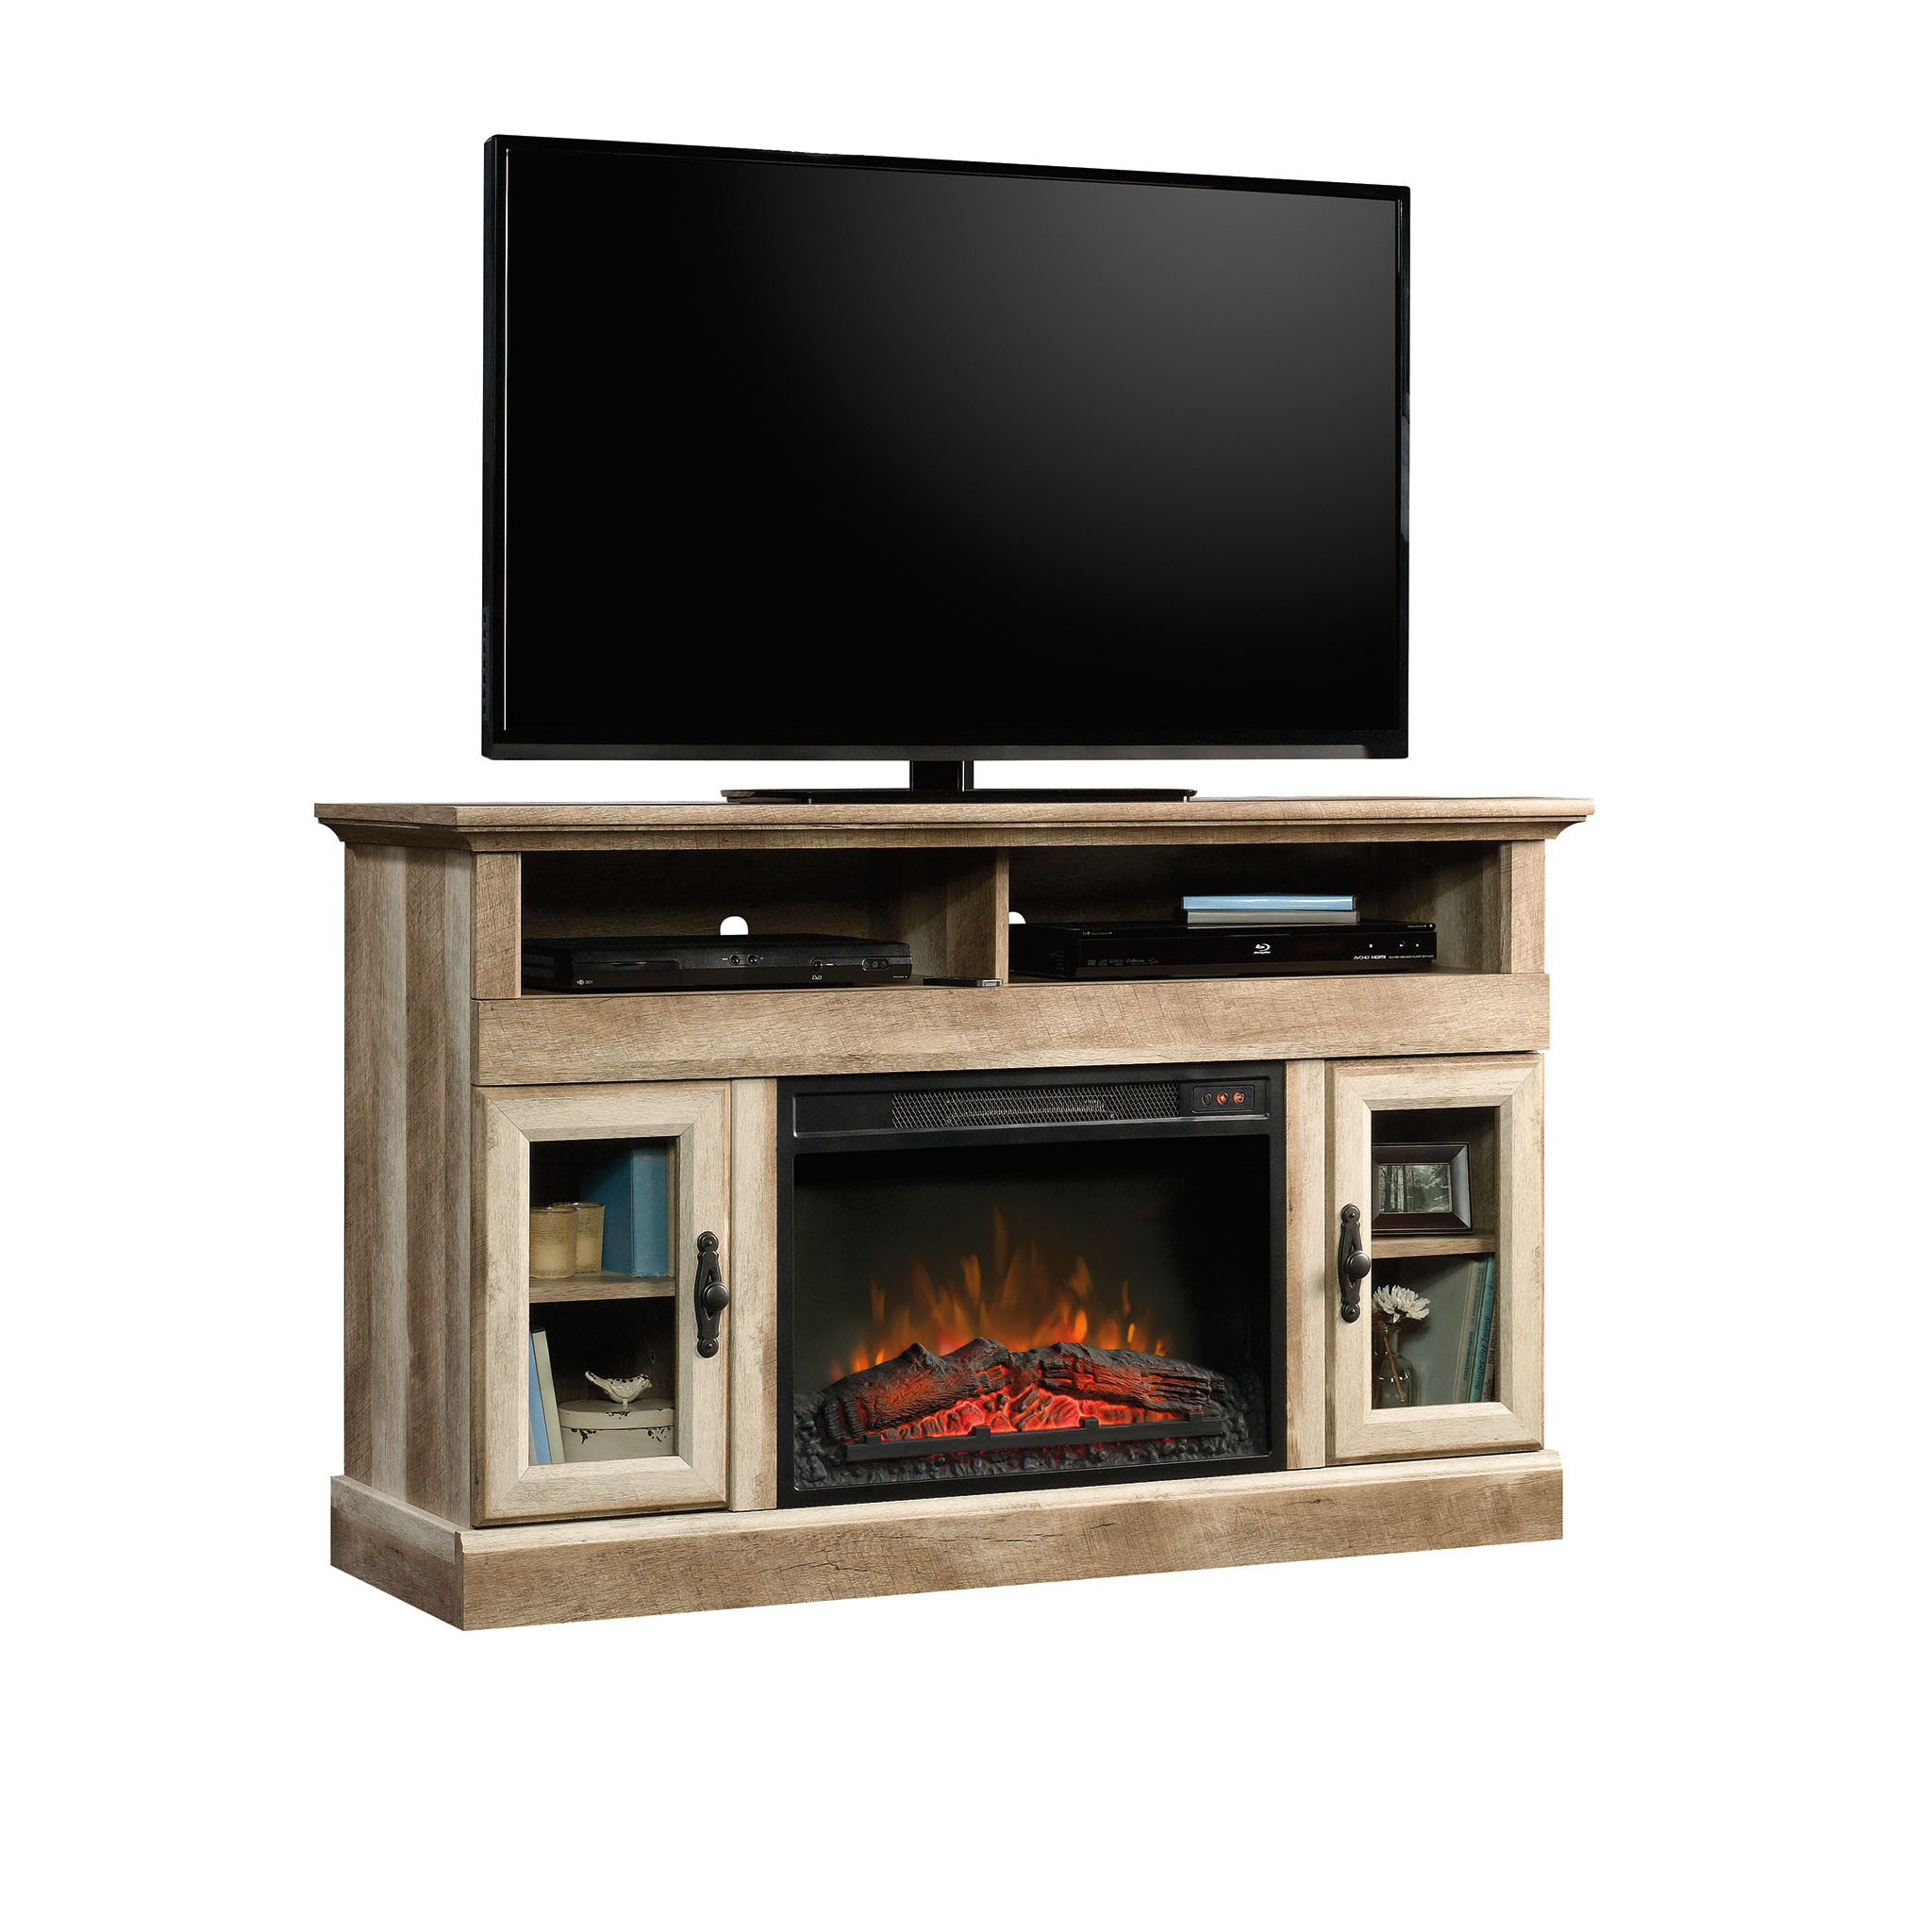 Better Homes & Gardens Crossmill Fireplace Media Console, for TVs up to 60", Weathered Pine Finish - image 3 of 8